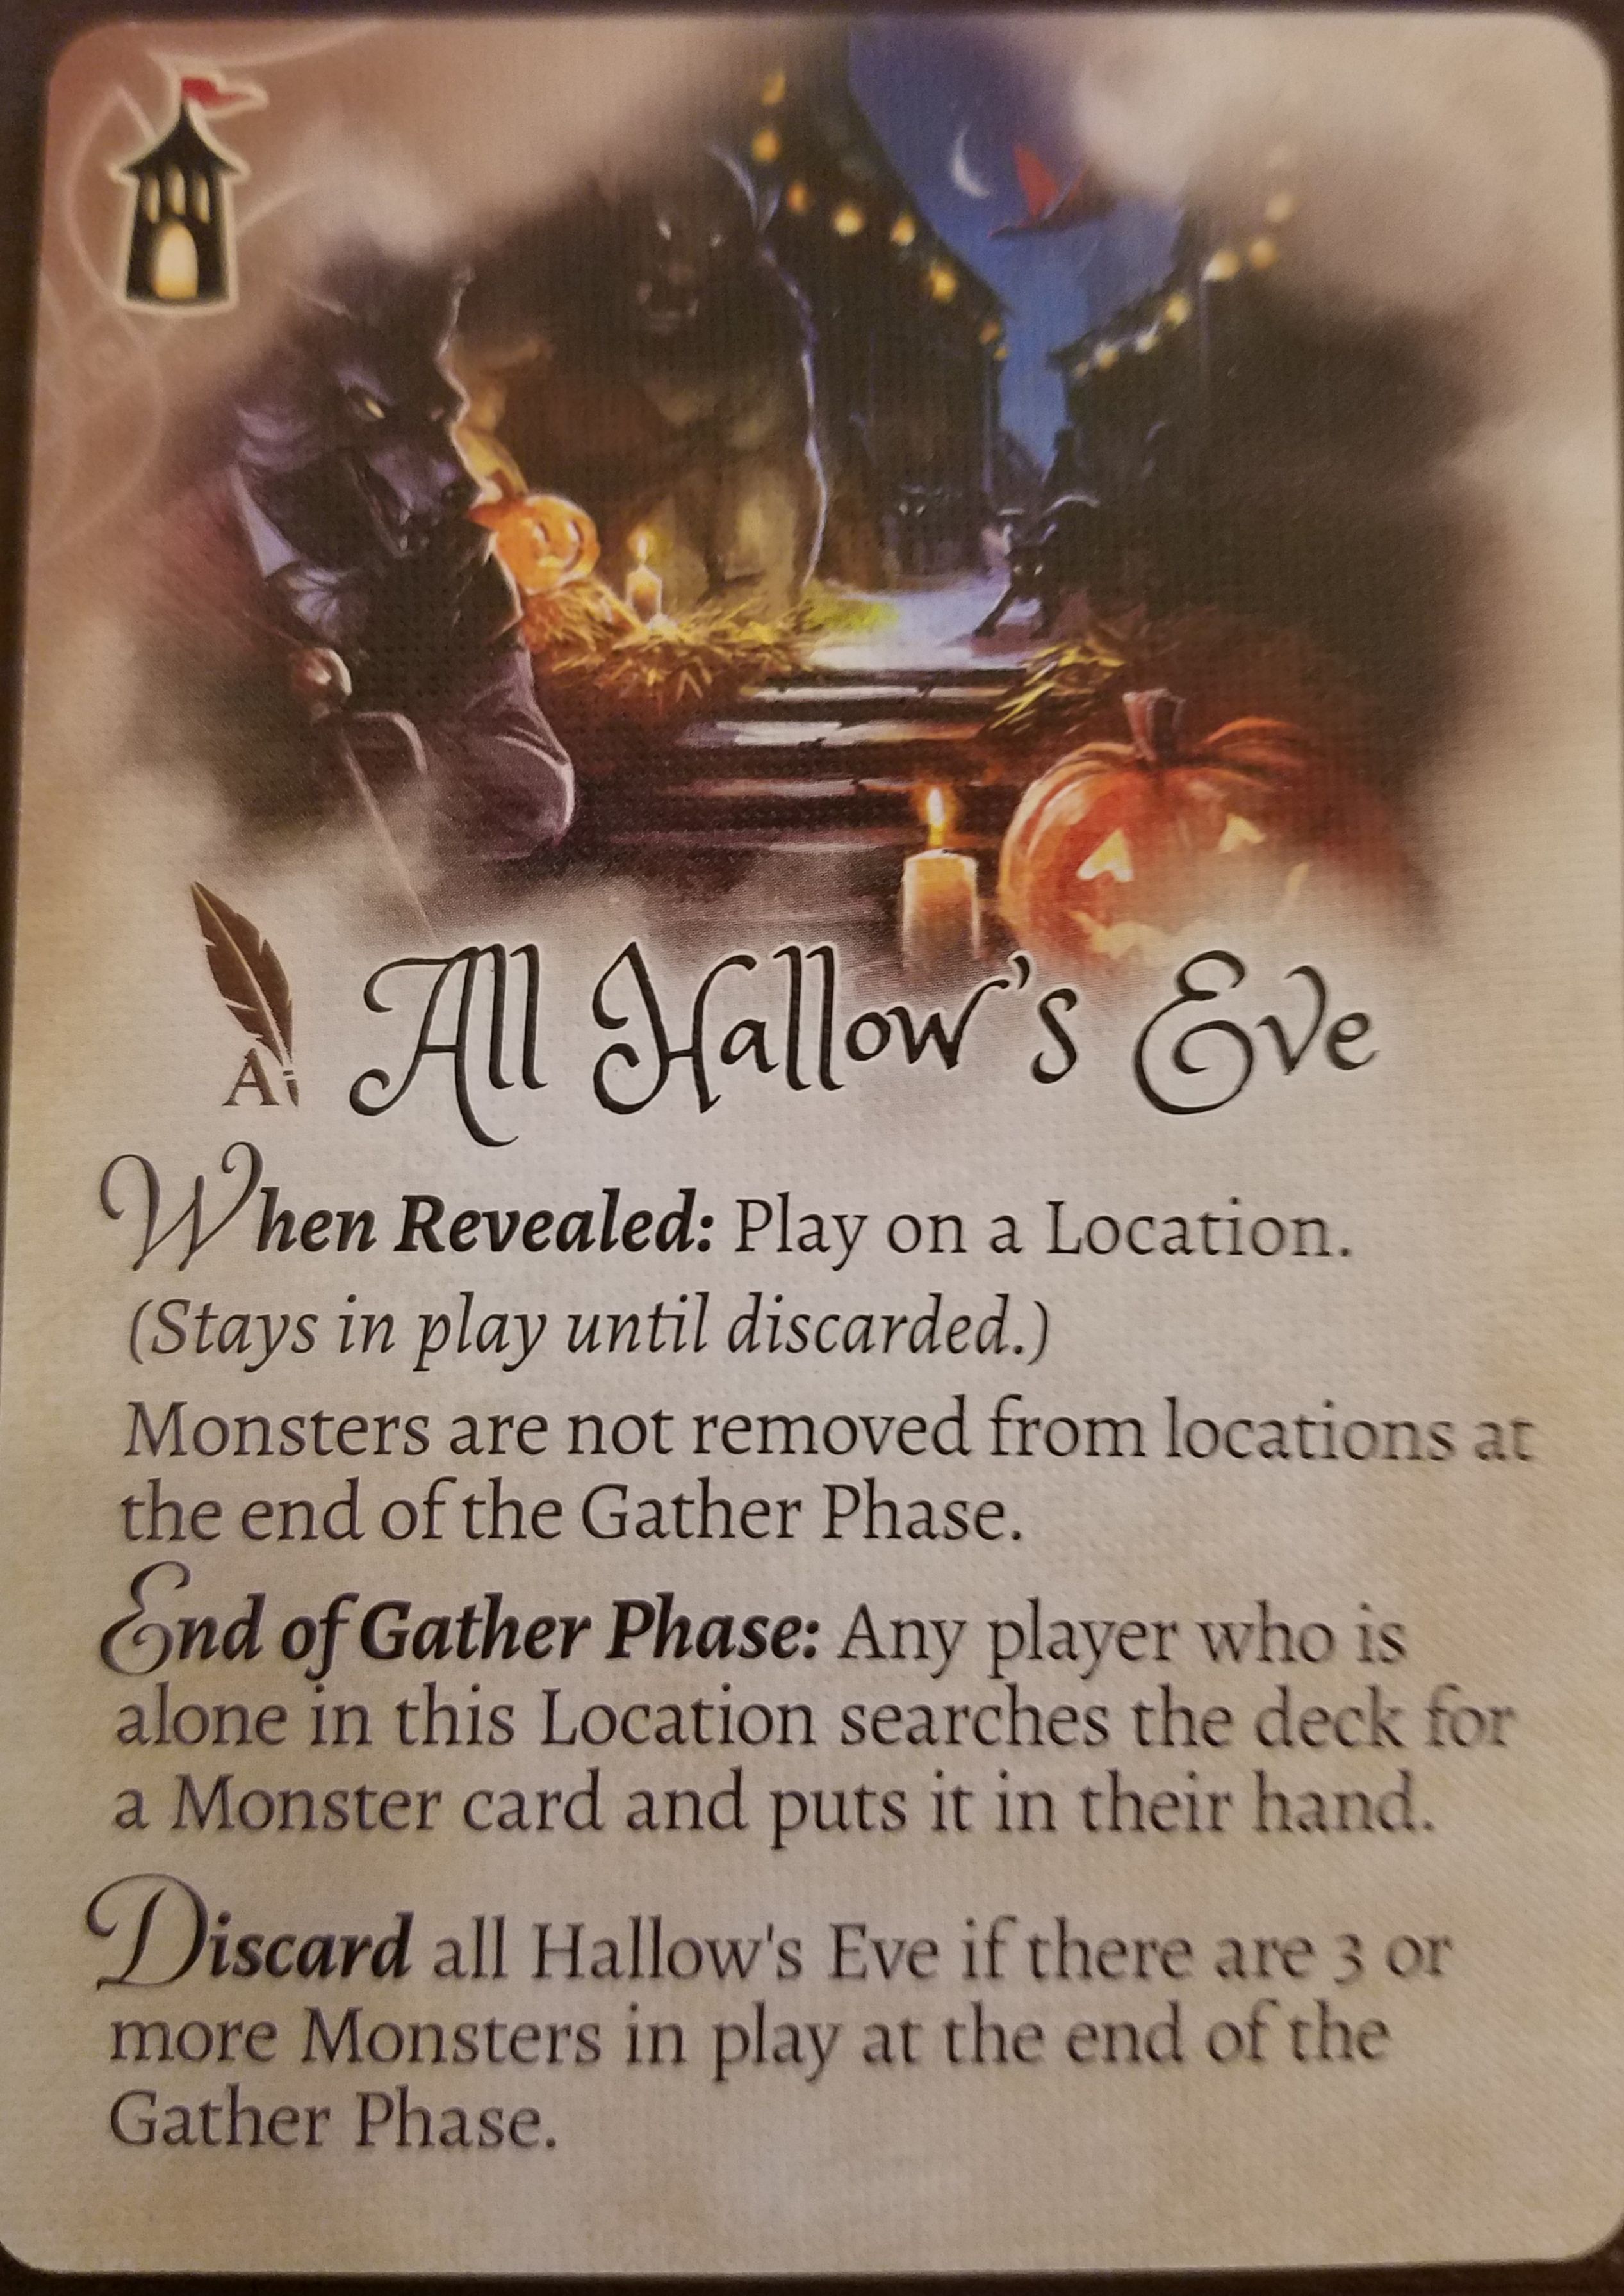 The Grimm Forest: All Hallow's Eve